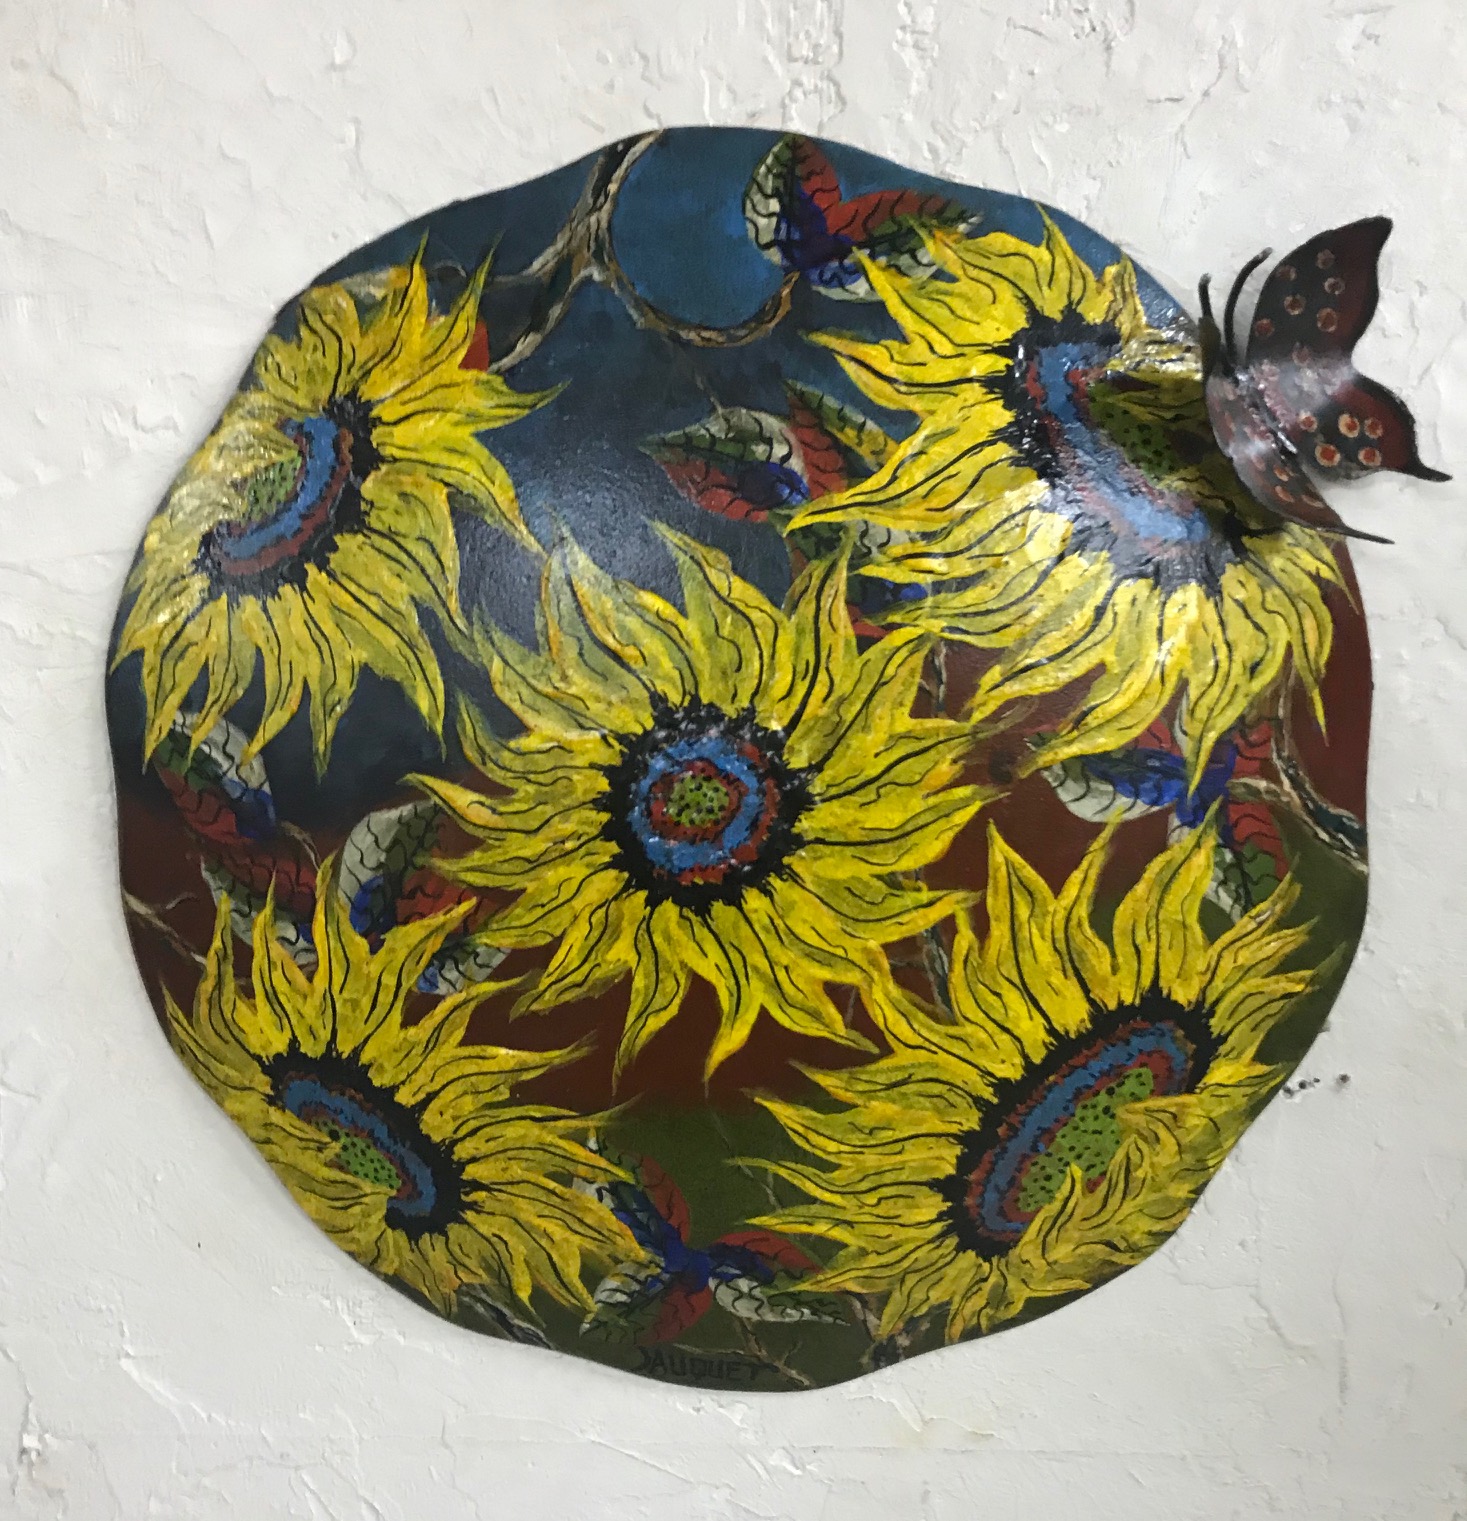 Sunflowers on Wavy Disk